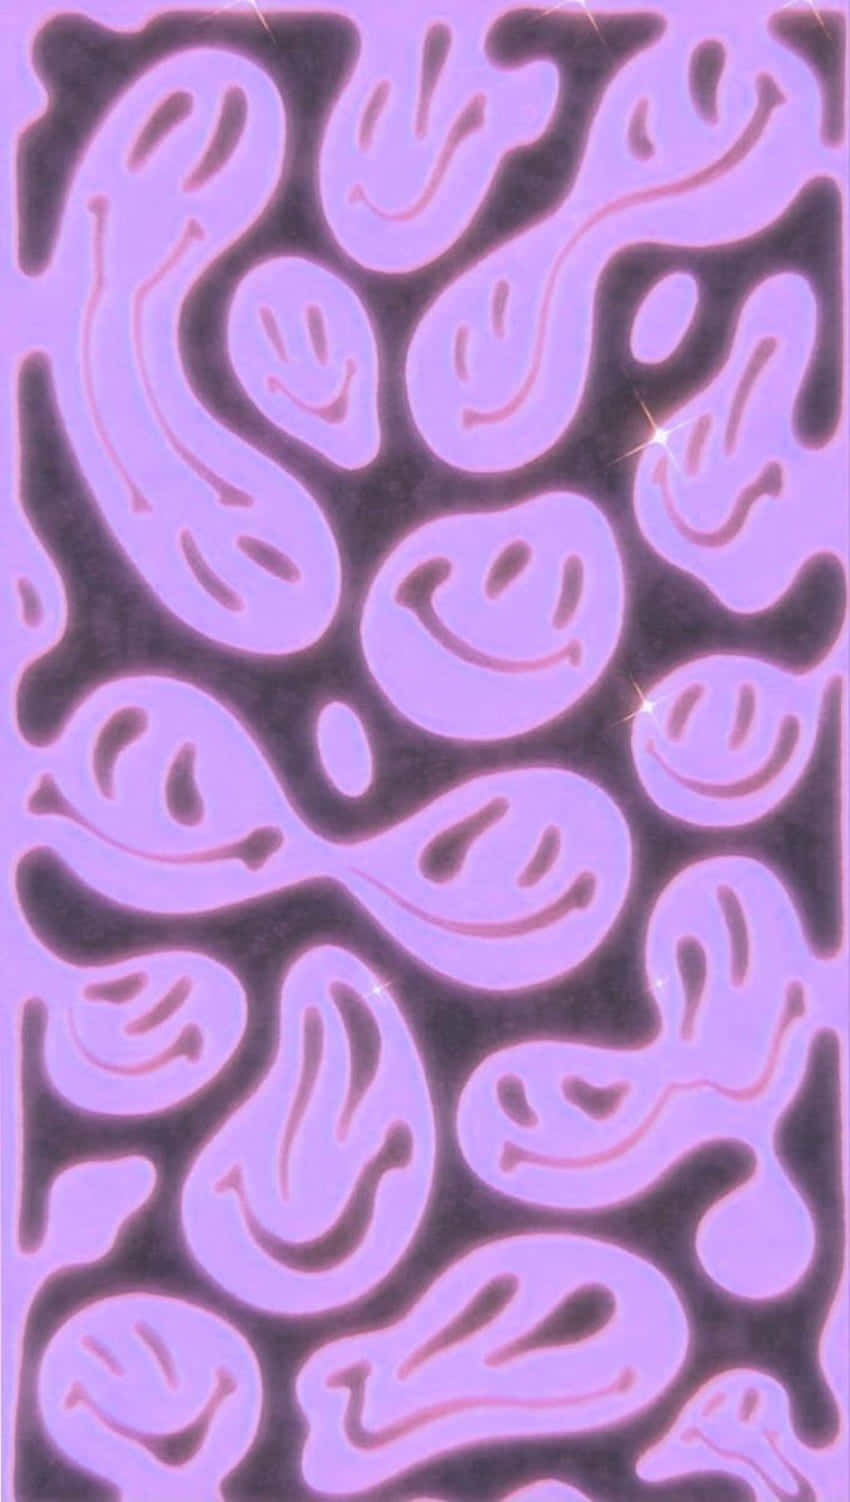 Psychedelic_ Smiley_ Face_ Pattern.jpg Wallpaper